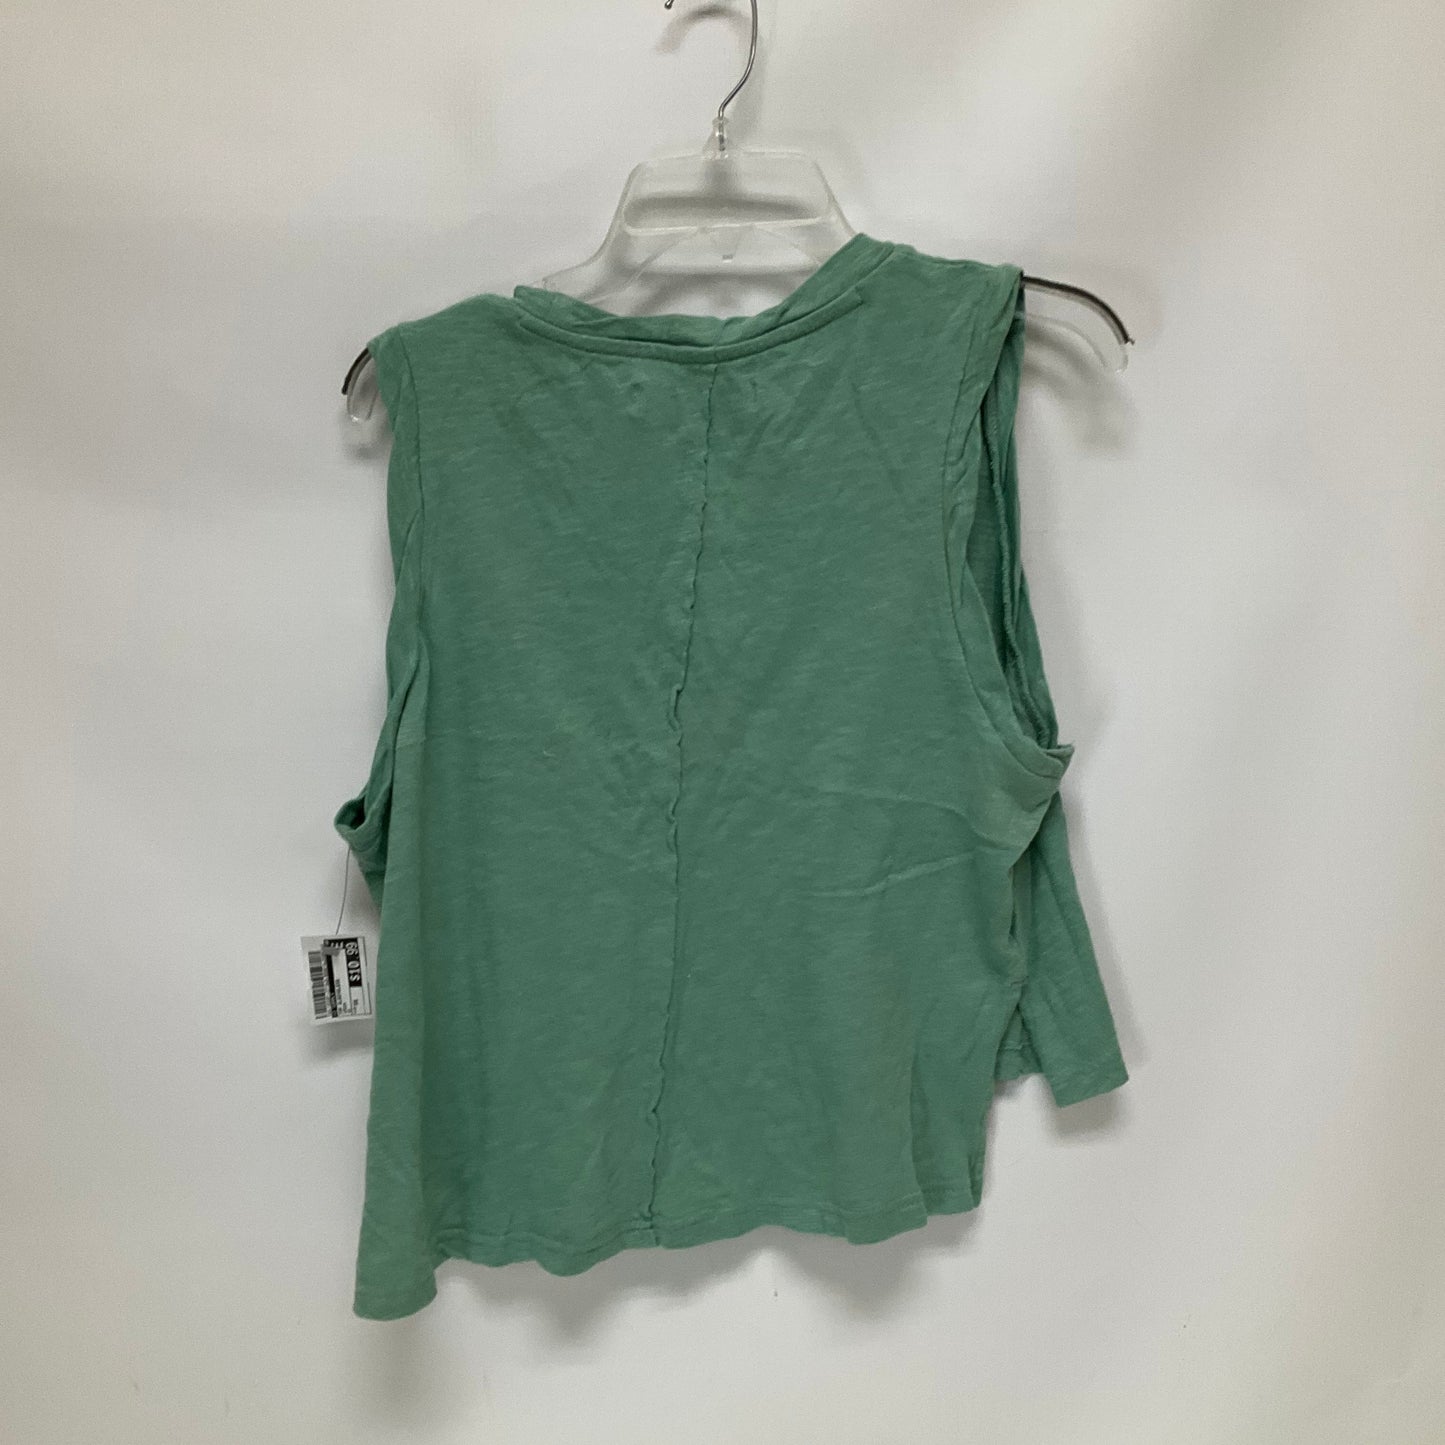 Top Sleeveless By Z Supply  Size: Xs